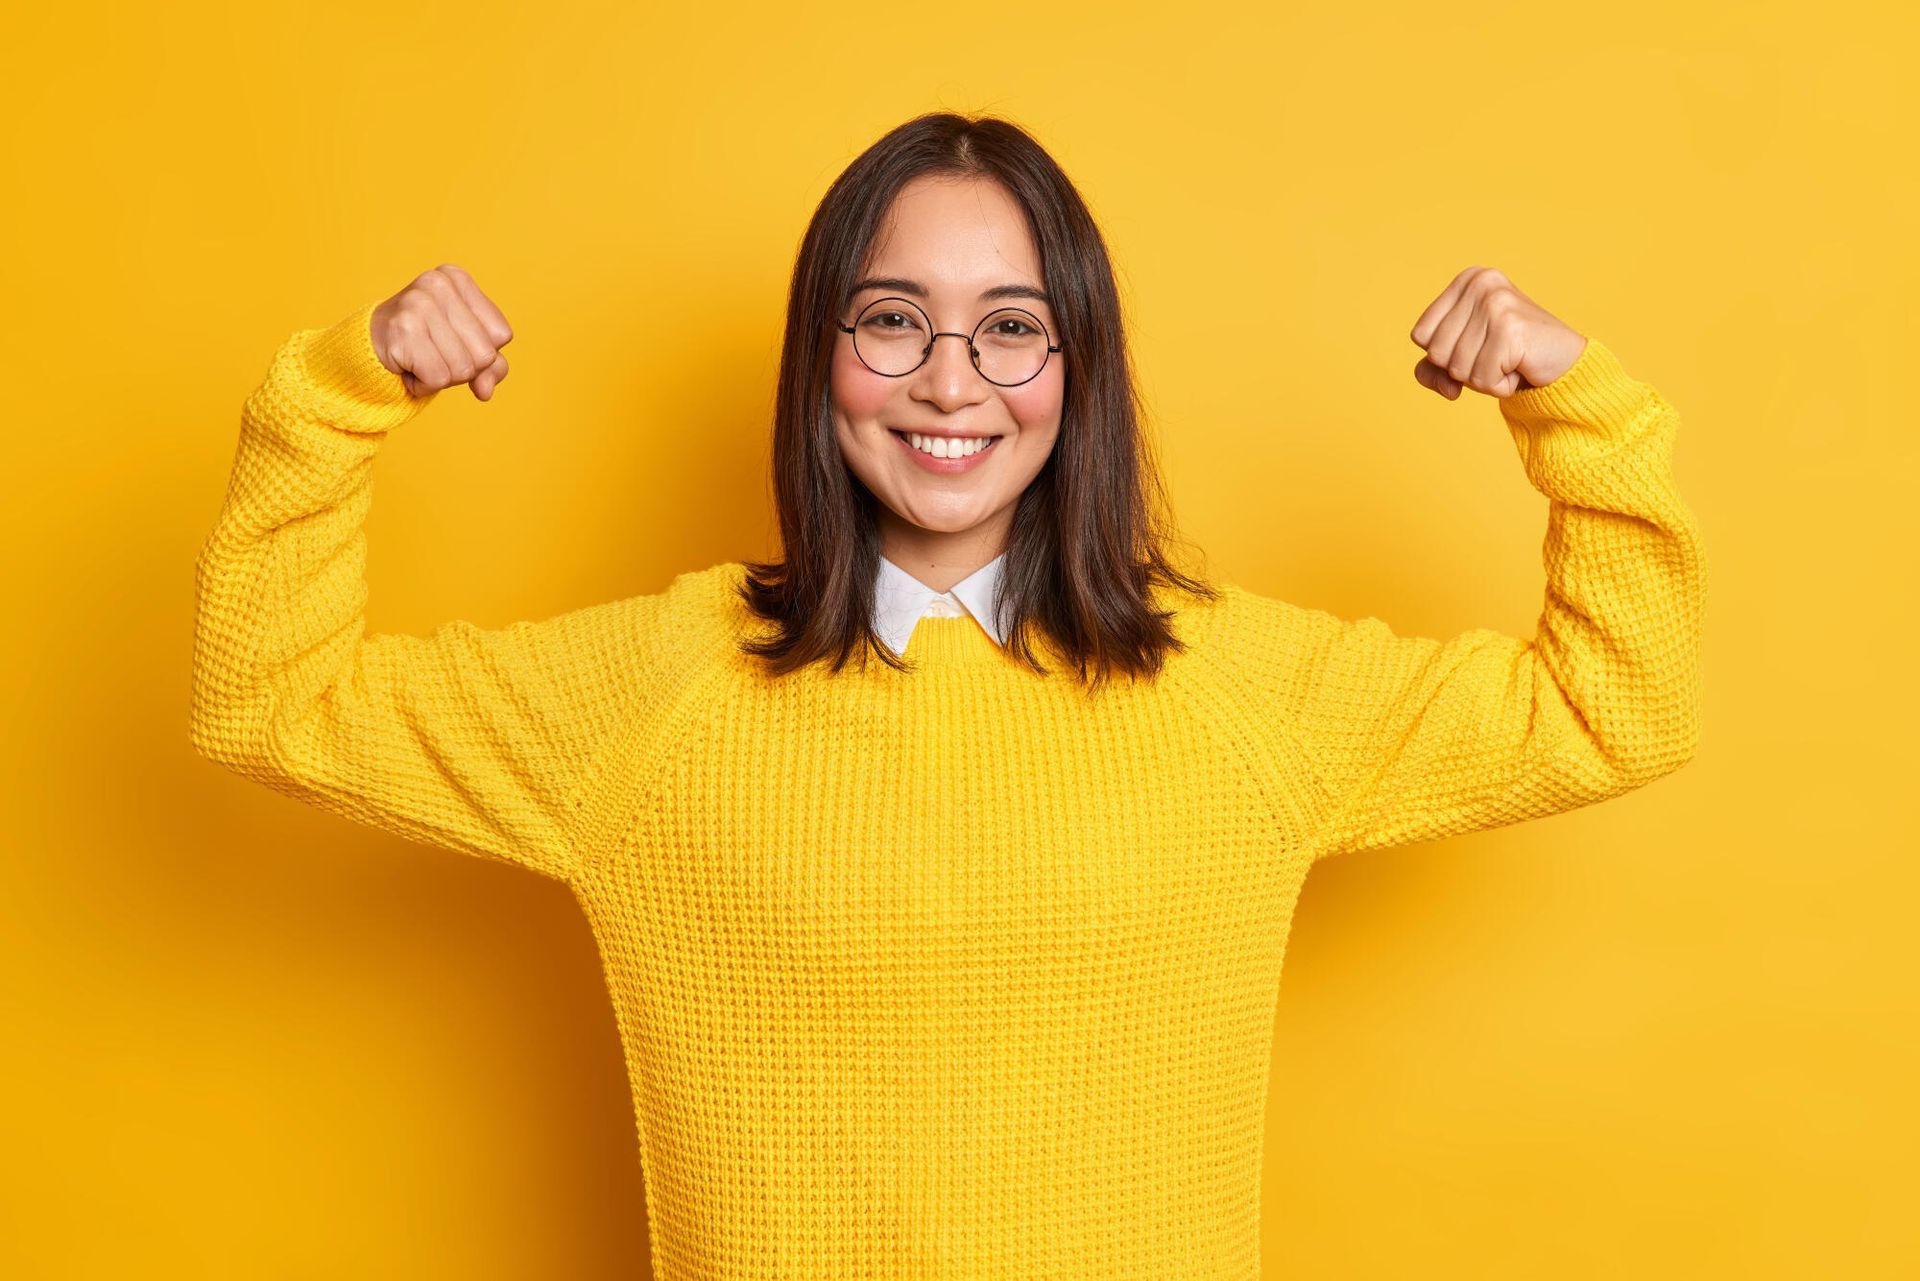 A woman in a yellow sweater is flexing her muscles.